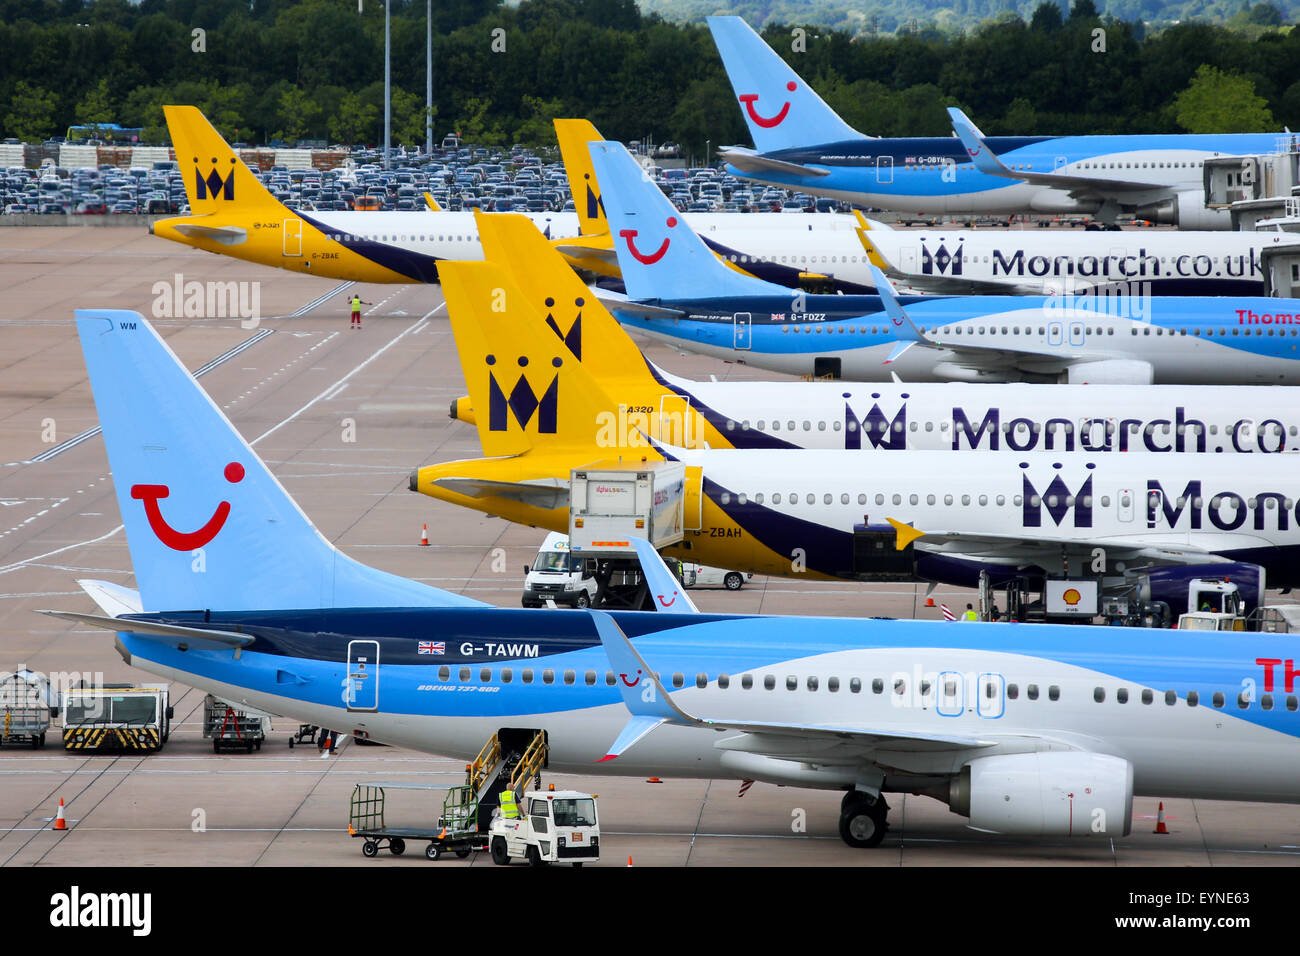 Terminal 2 at Manchester airport dominated by Thomson Airways & Monarch Airlines. Stock Photo